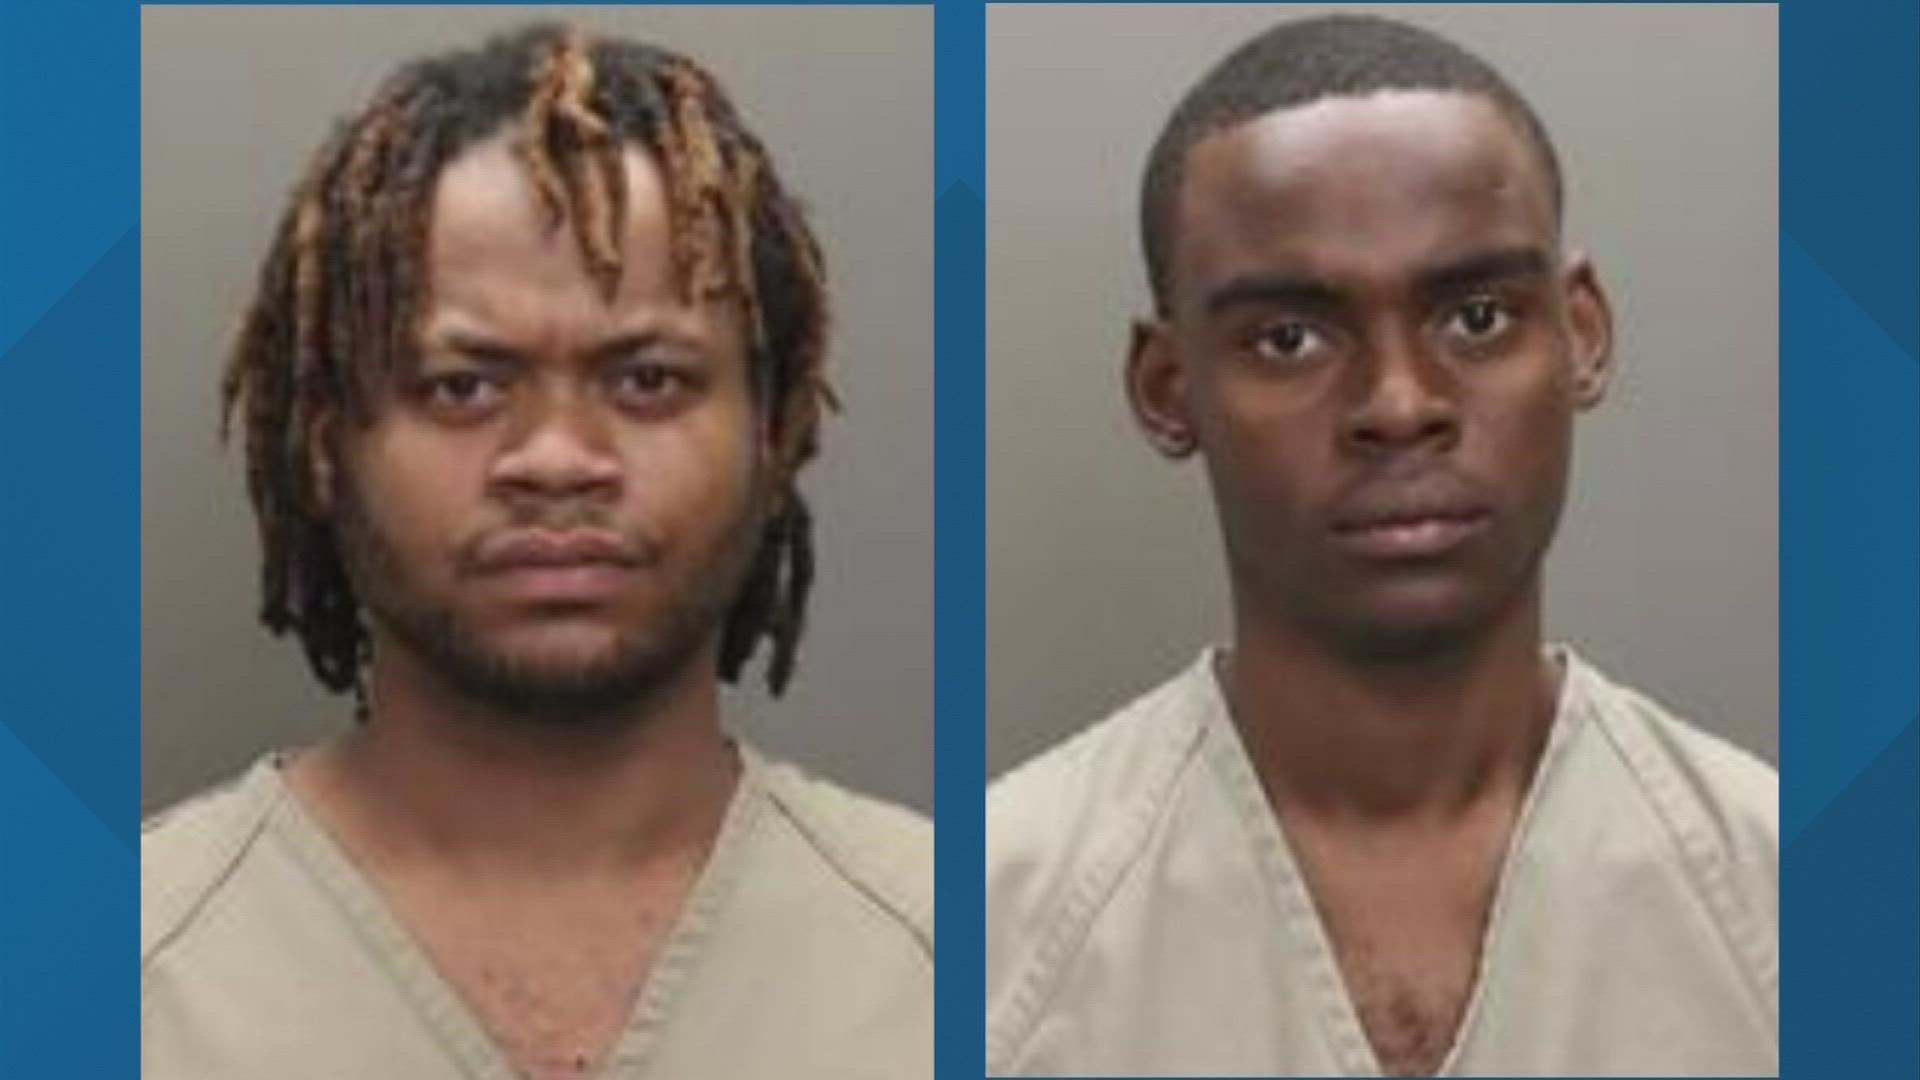 Shandale Brown, 23, and Ayub Issack, 20, were taken into custody by Columbus Police SWAT Officers on Tuesday.